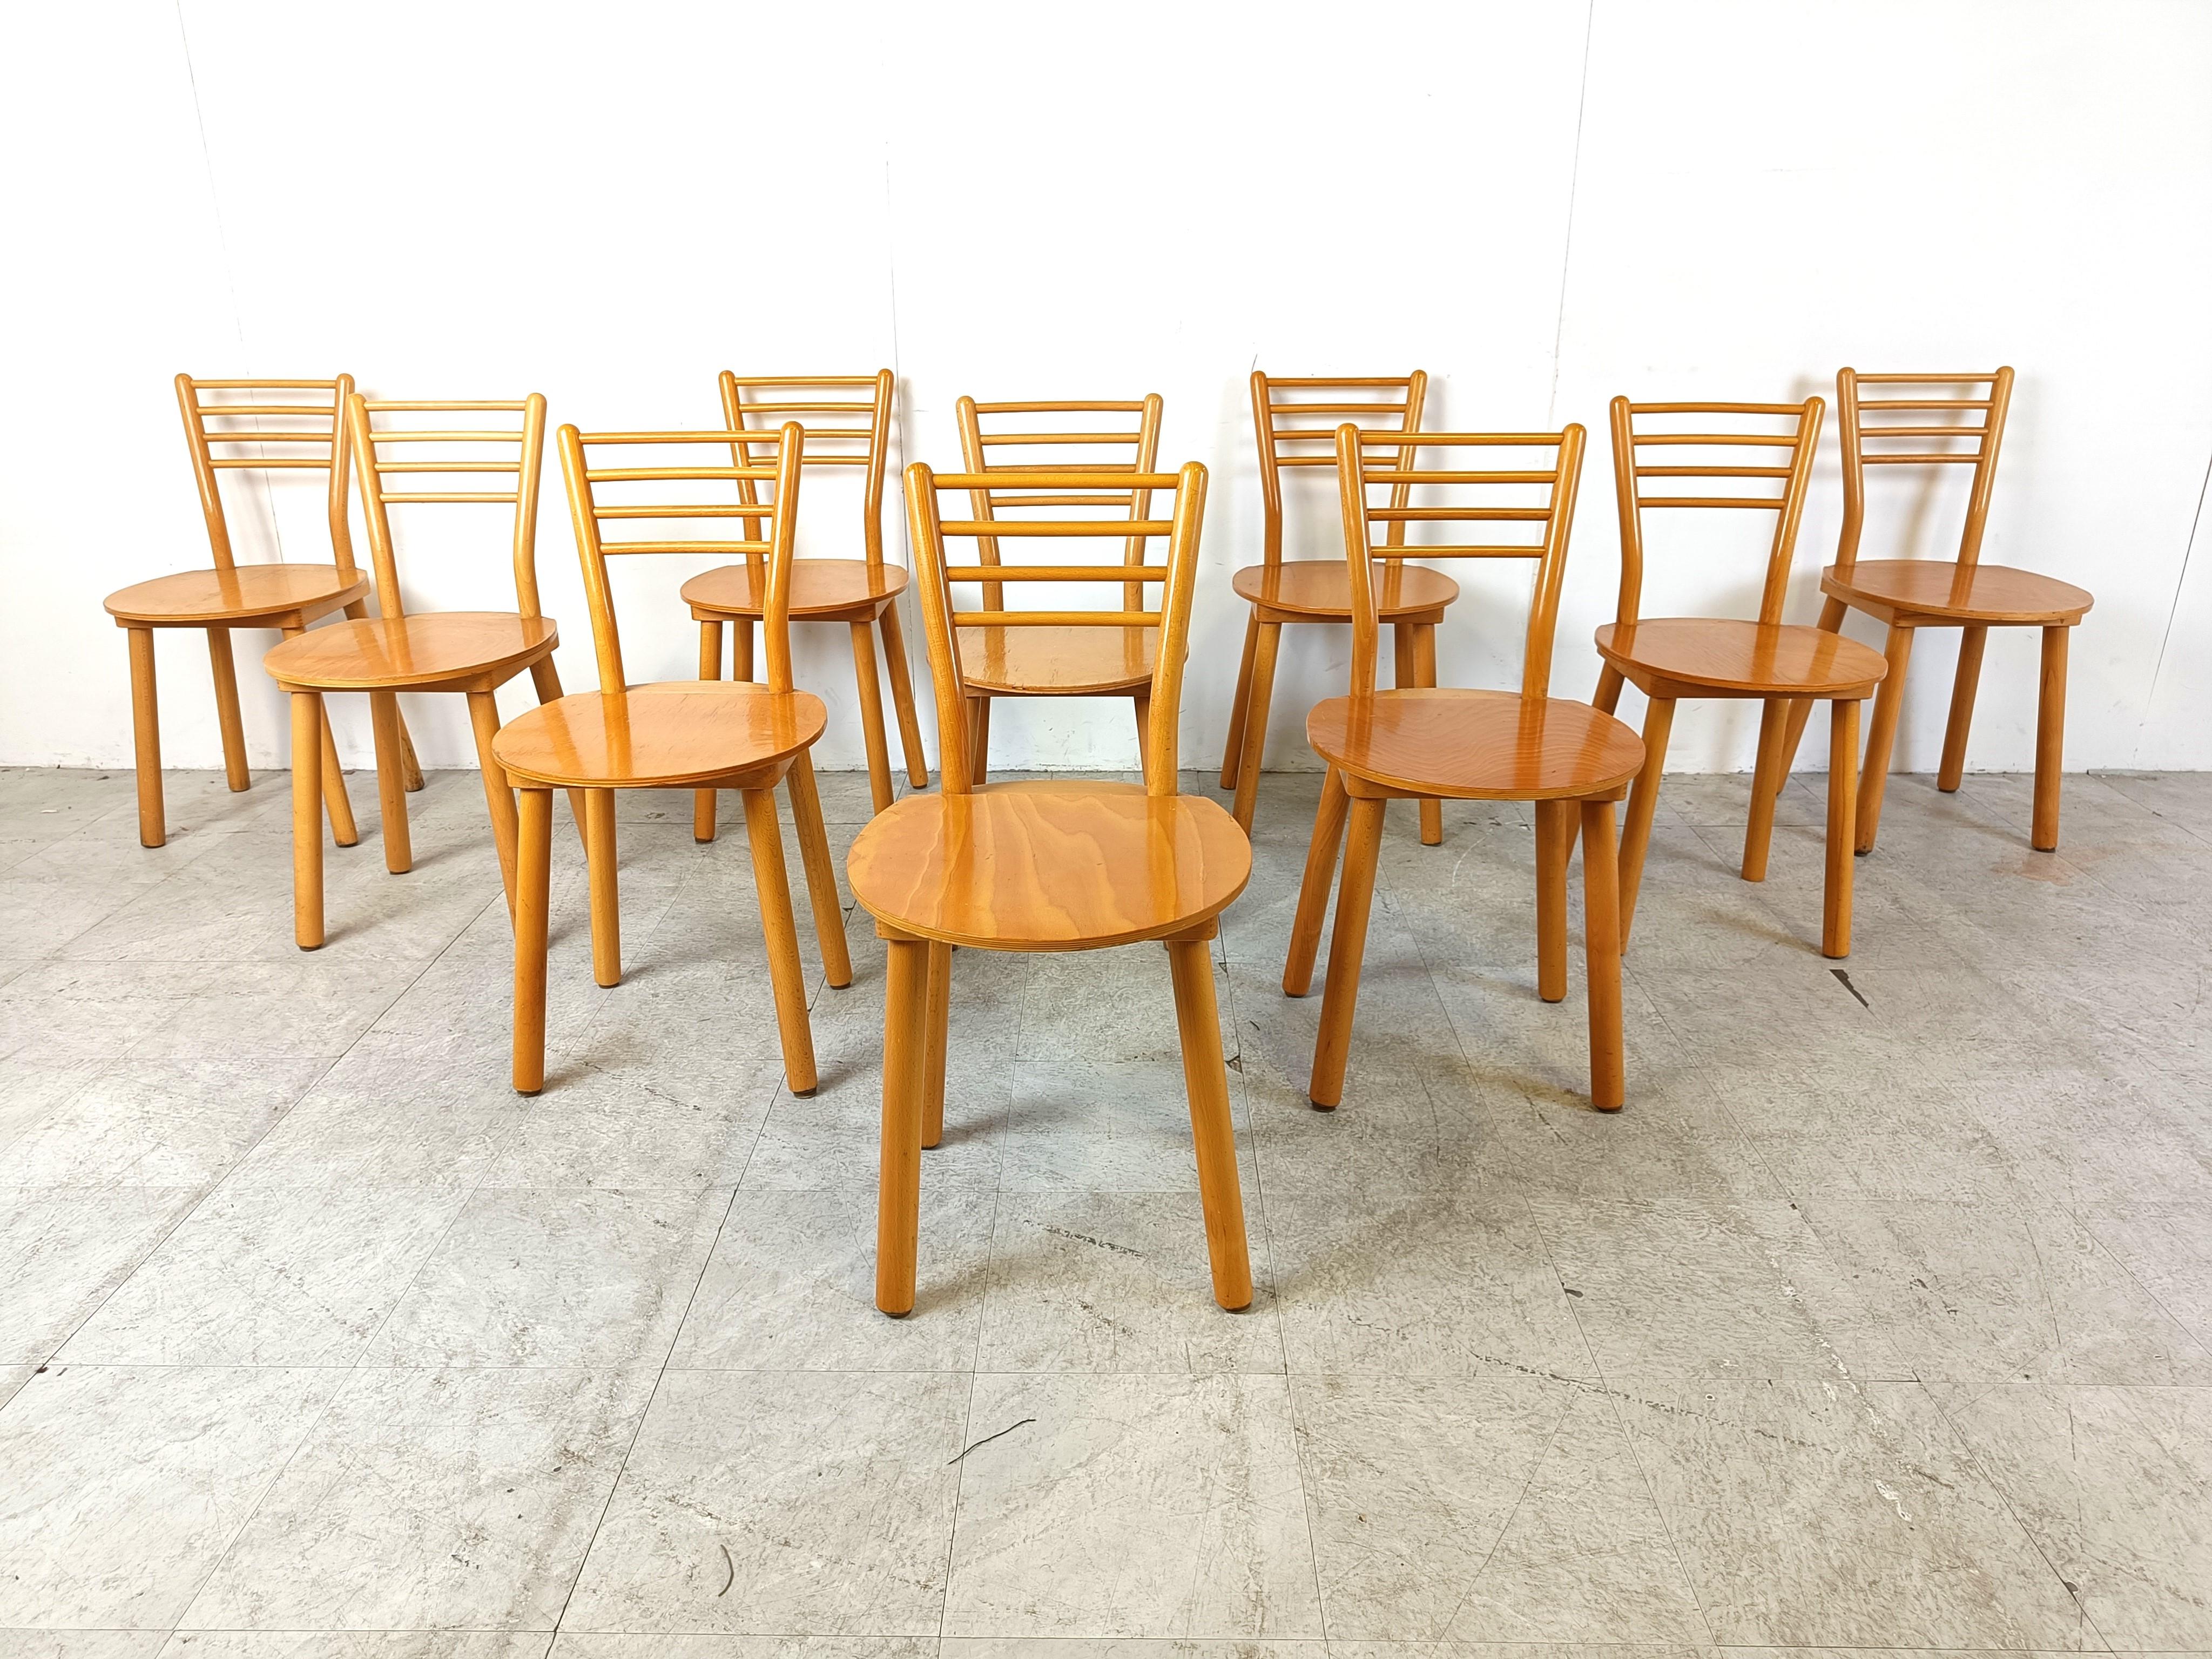 Vintage scandinavian dining chairs, 1970s For Sale 4